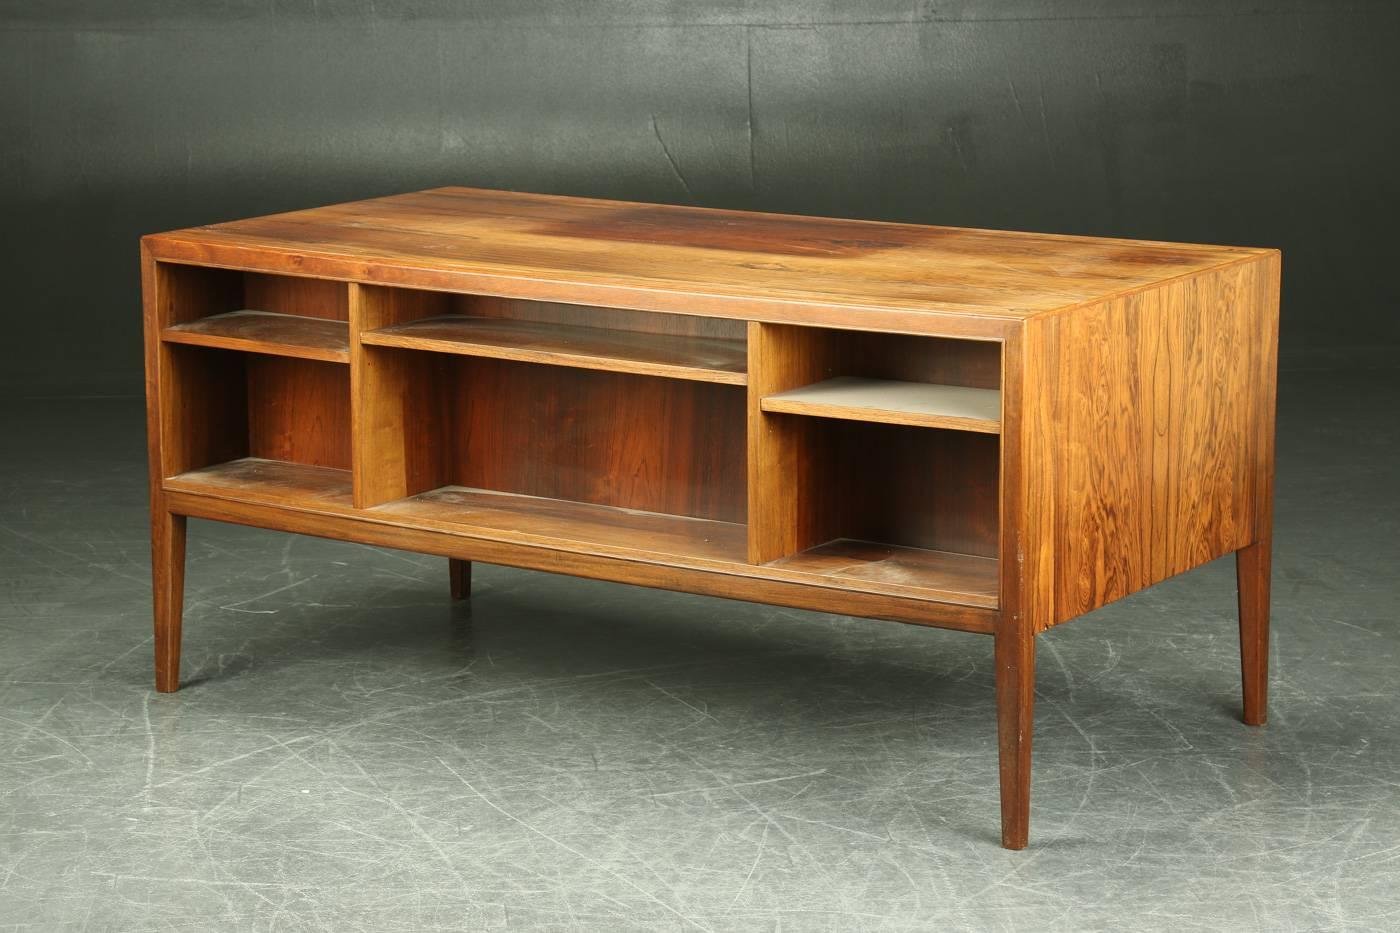 This rosewood desk was made in Denmark during the 1940s in Denmark. With a good height of 75cm or 29-1.2 inches, the desk is pictured in original condition. Upon purchase and included in the price listed, the table will be re-polished to restore